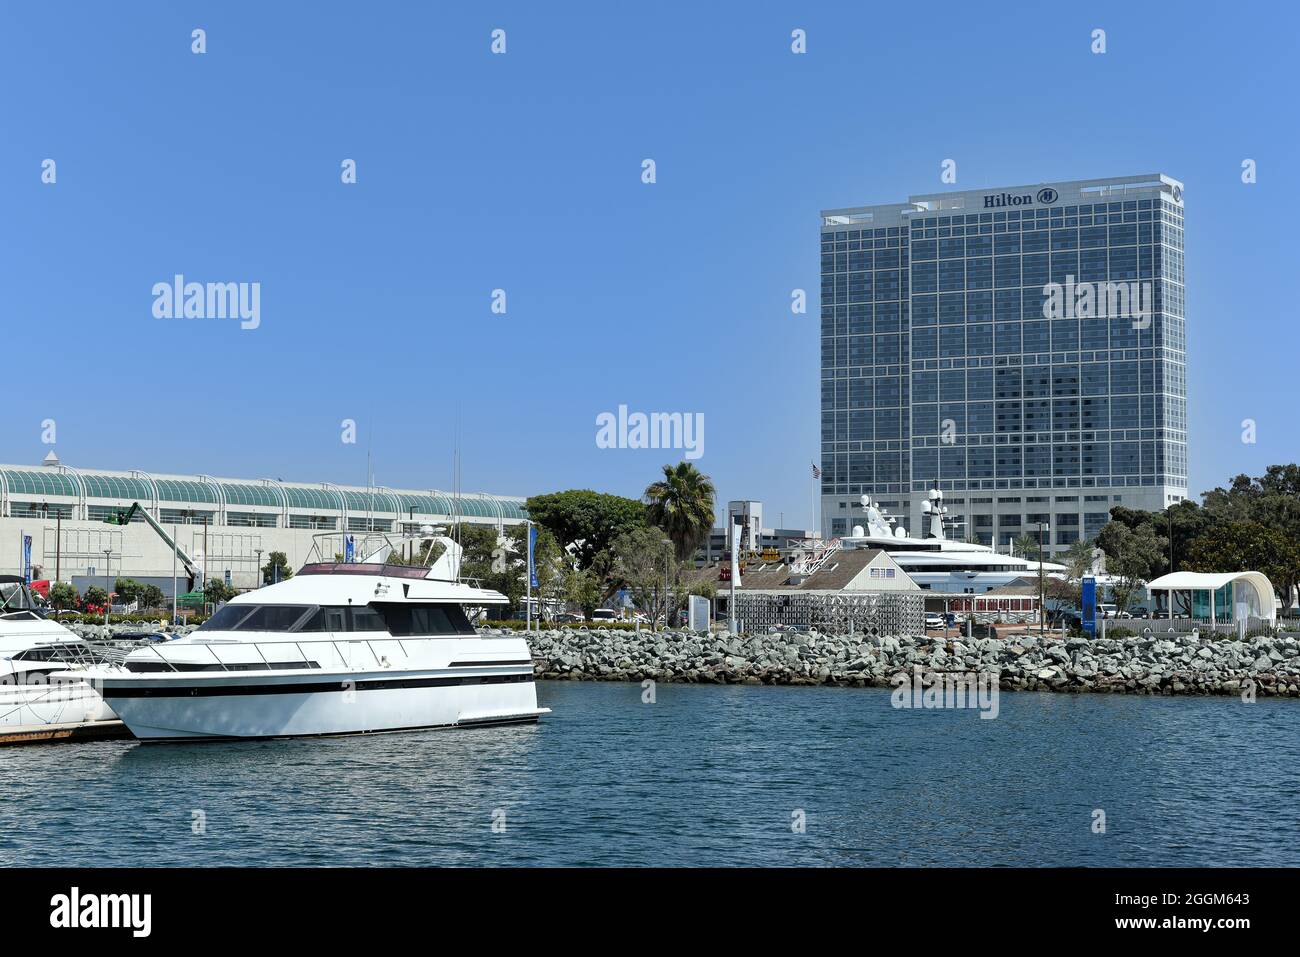 SAN DIEGO, CALIFORNIA - 25 AUG 2021: The Hilton Bayfront and Convention Center from the Embarcadero Marina. Stock Photo